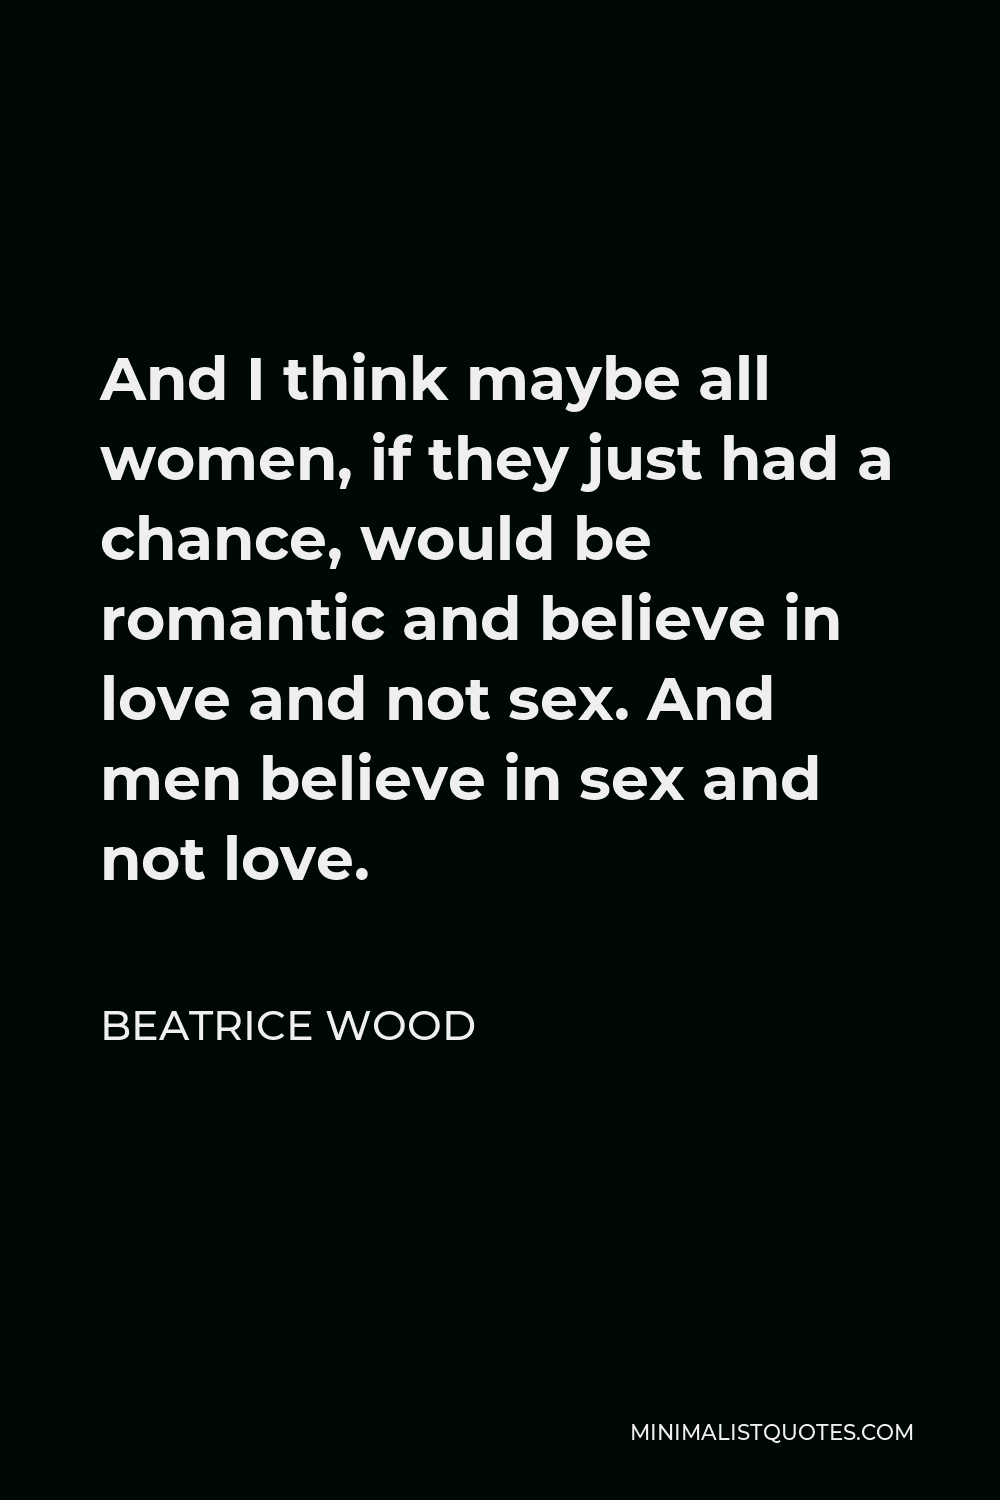 Beatrice Wood Quote - And I think maybe all women, if they just had a chance, would be romantic and believe in love and not sex. And men believe in sex and not love.